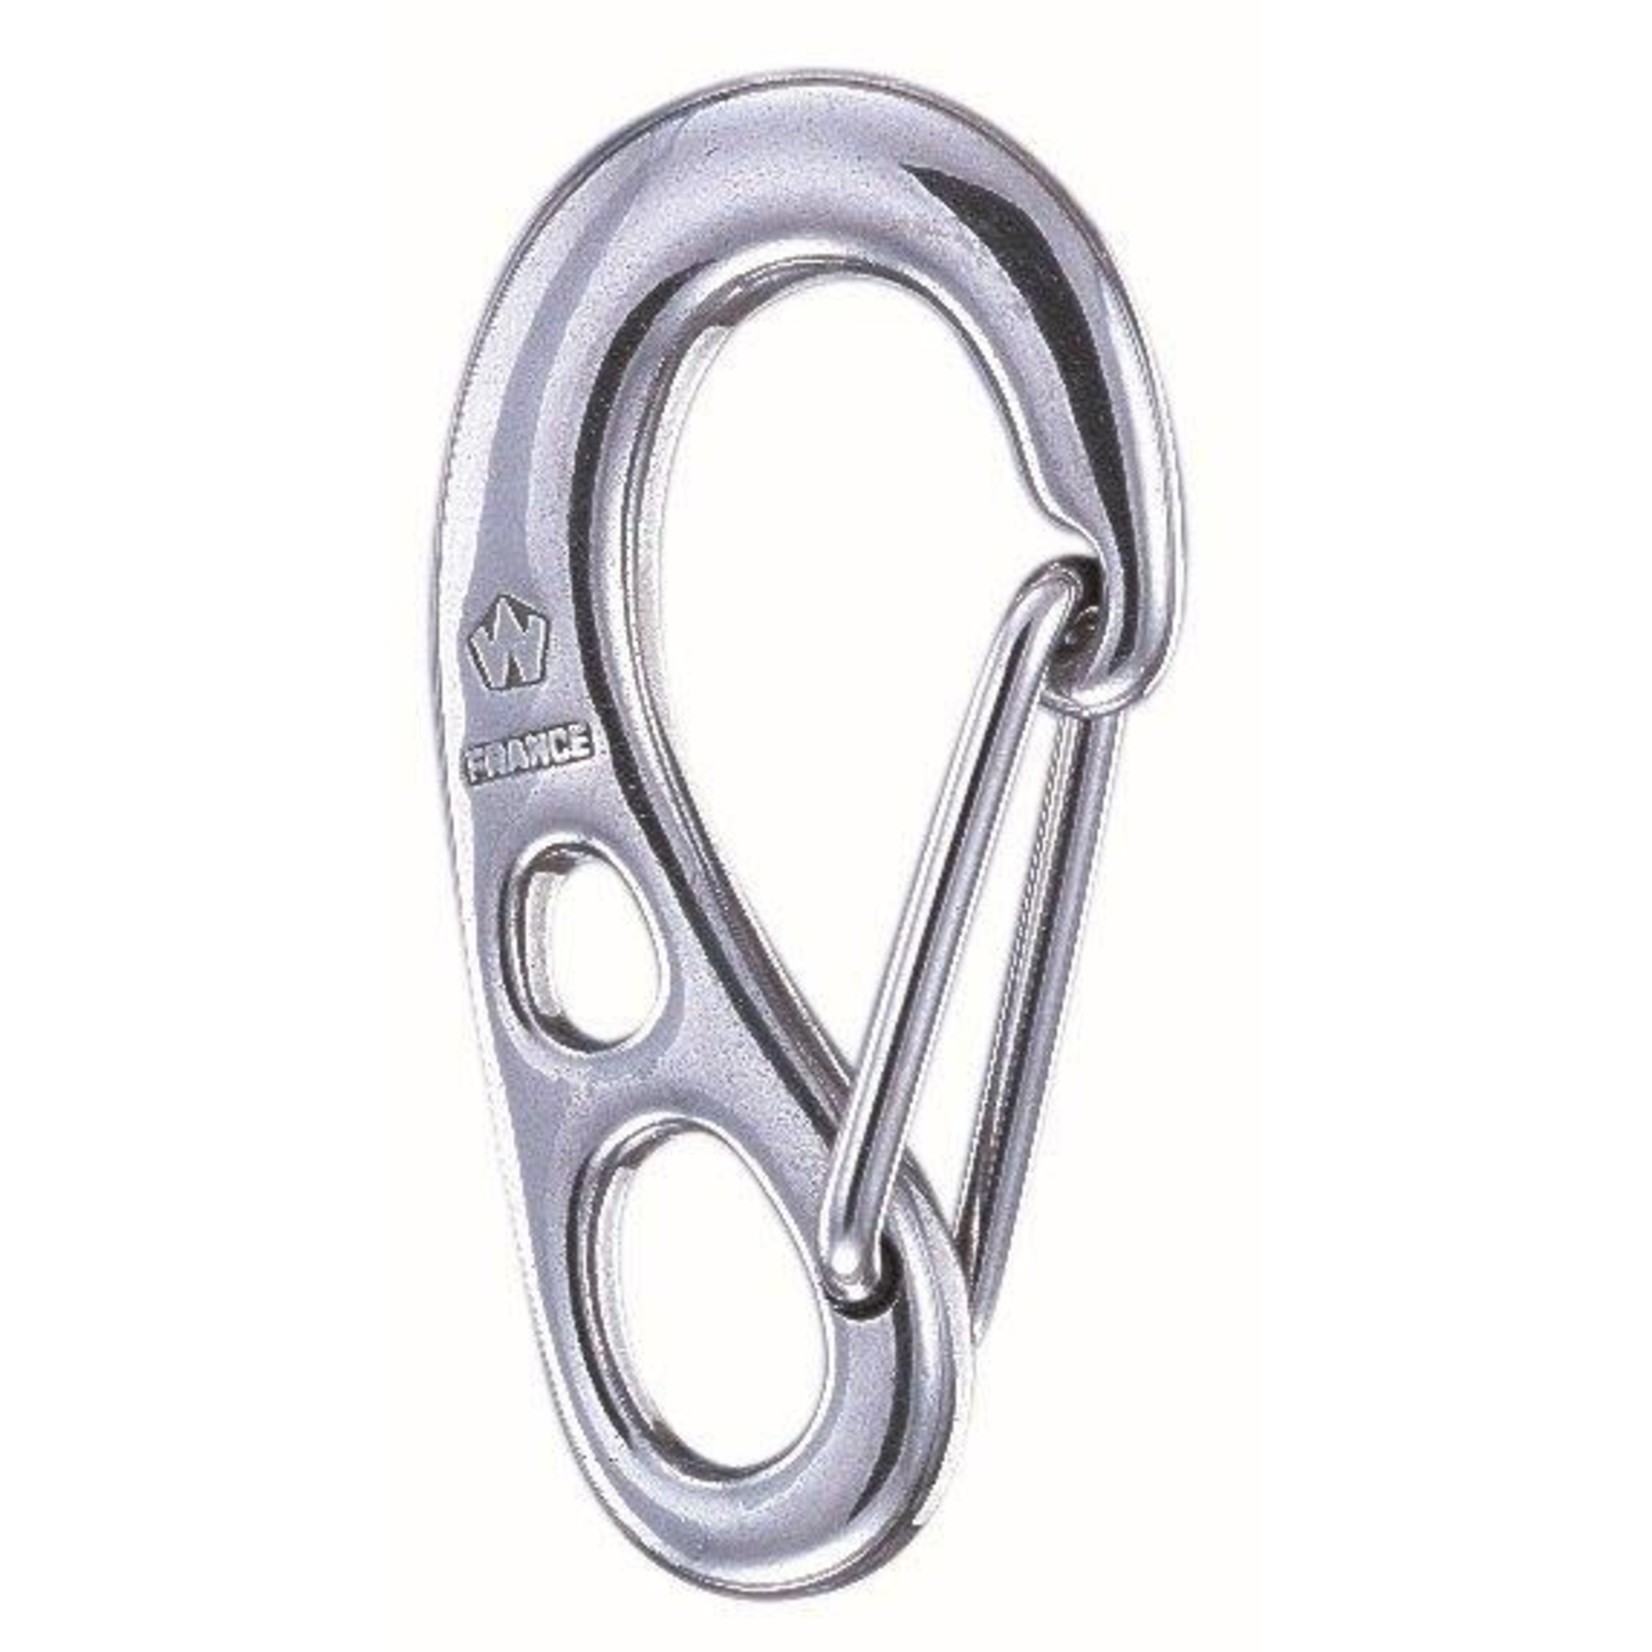 Wichard HR safety snap hook - With swivel - Length: 100 mm